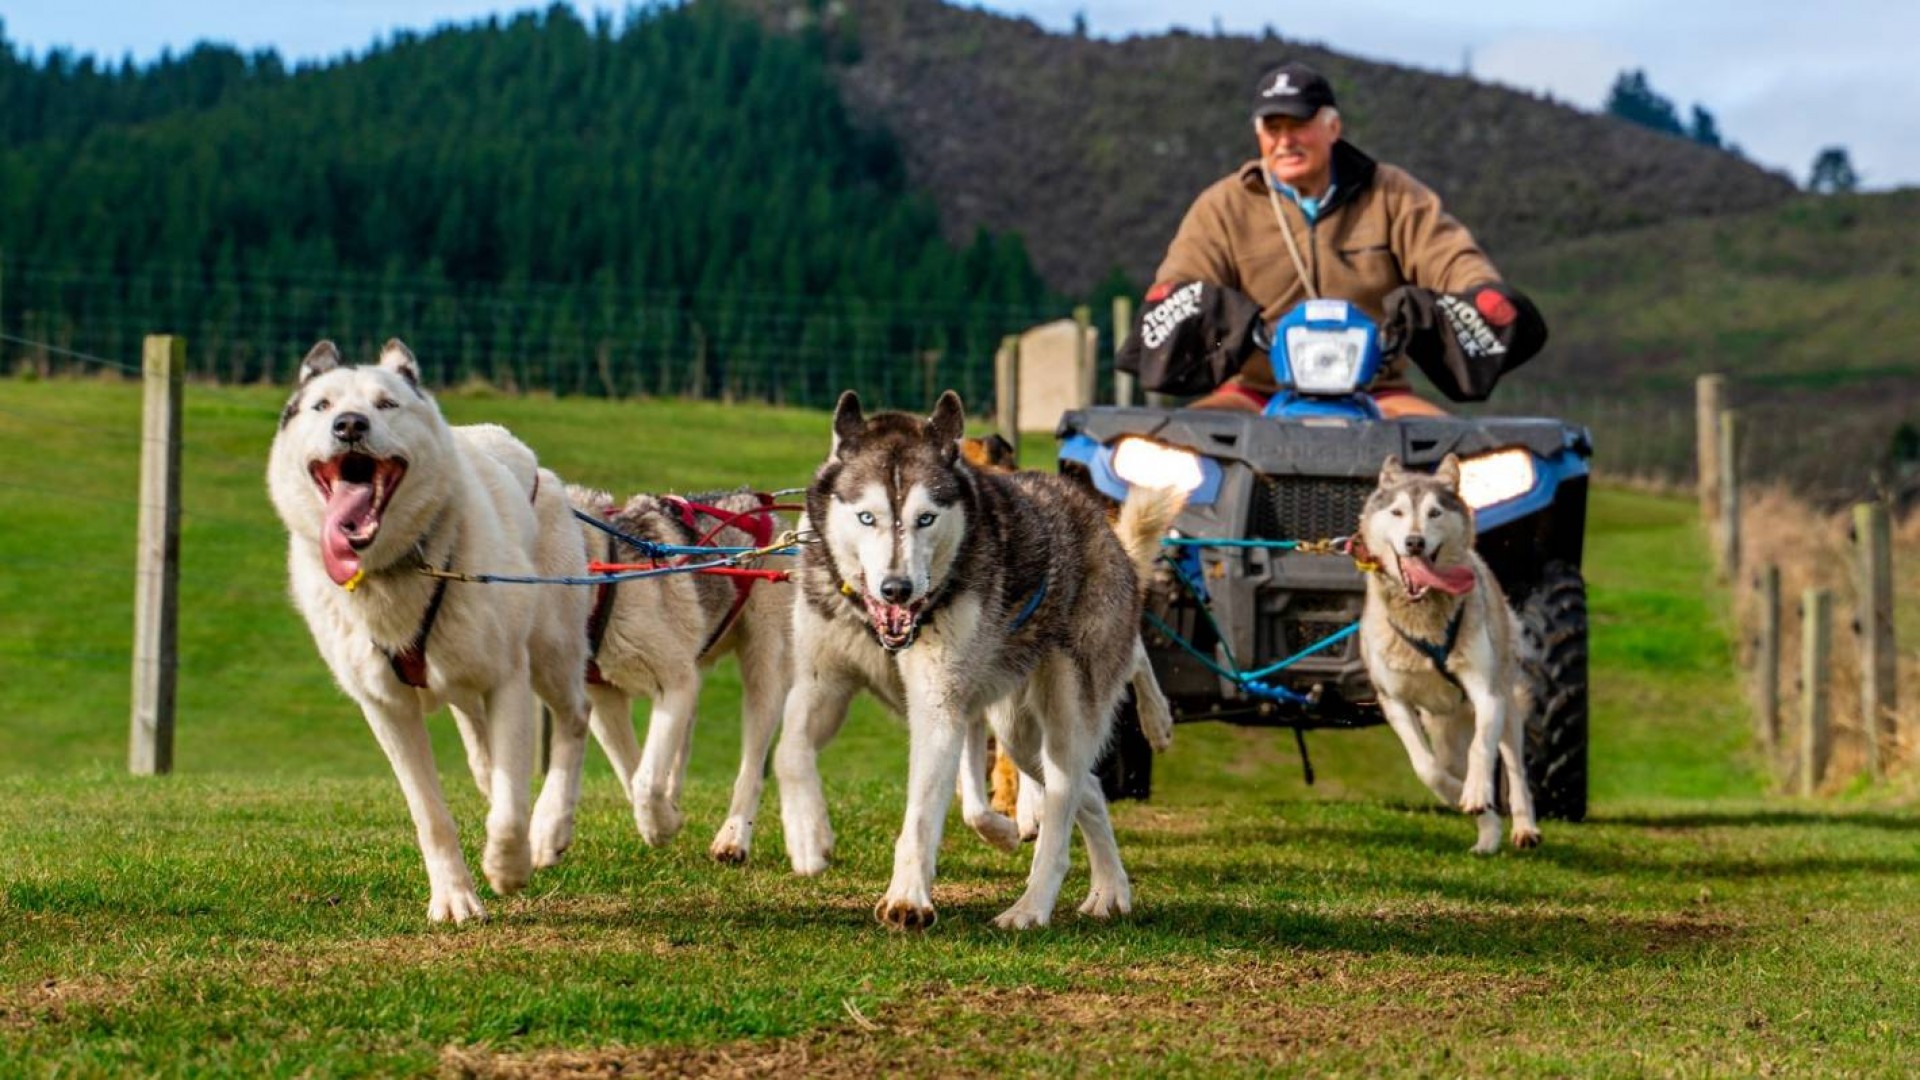 The Sled Dogs From Siberia